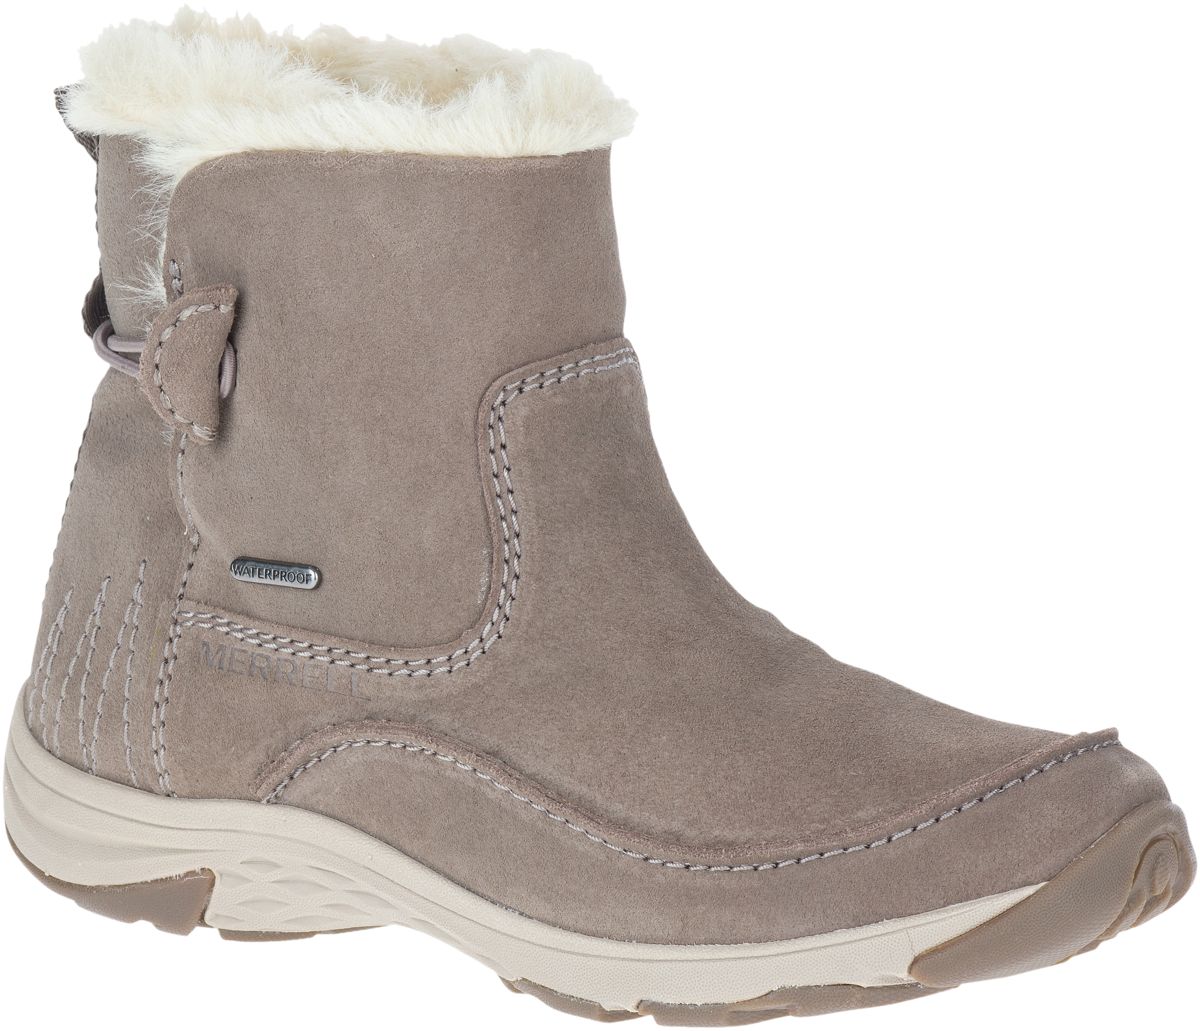 slip on winter boots canada